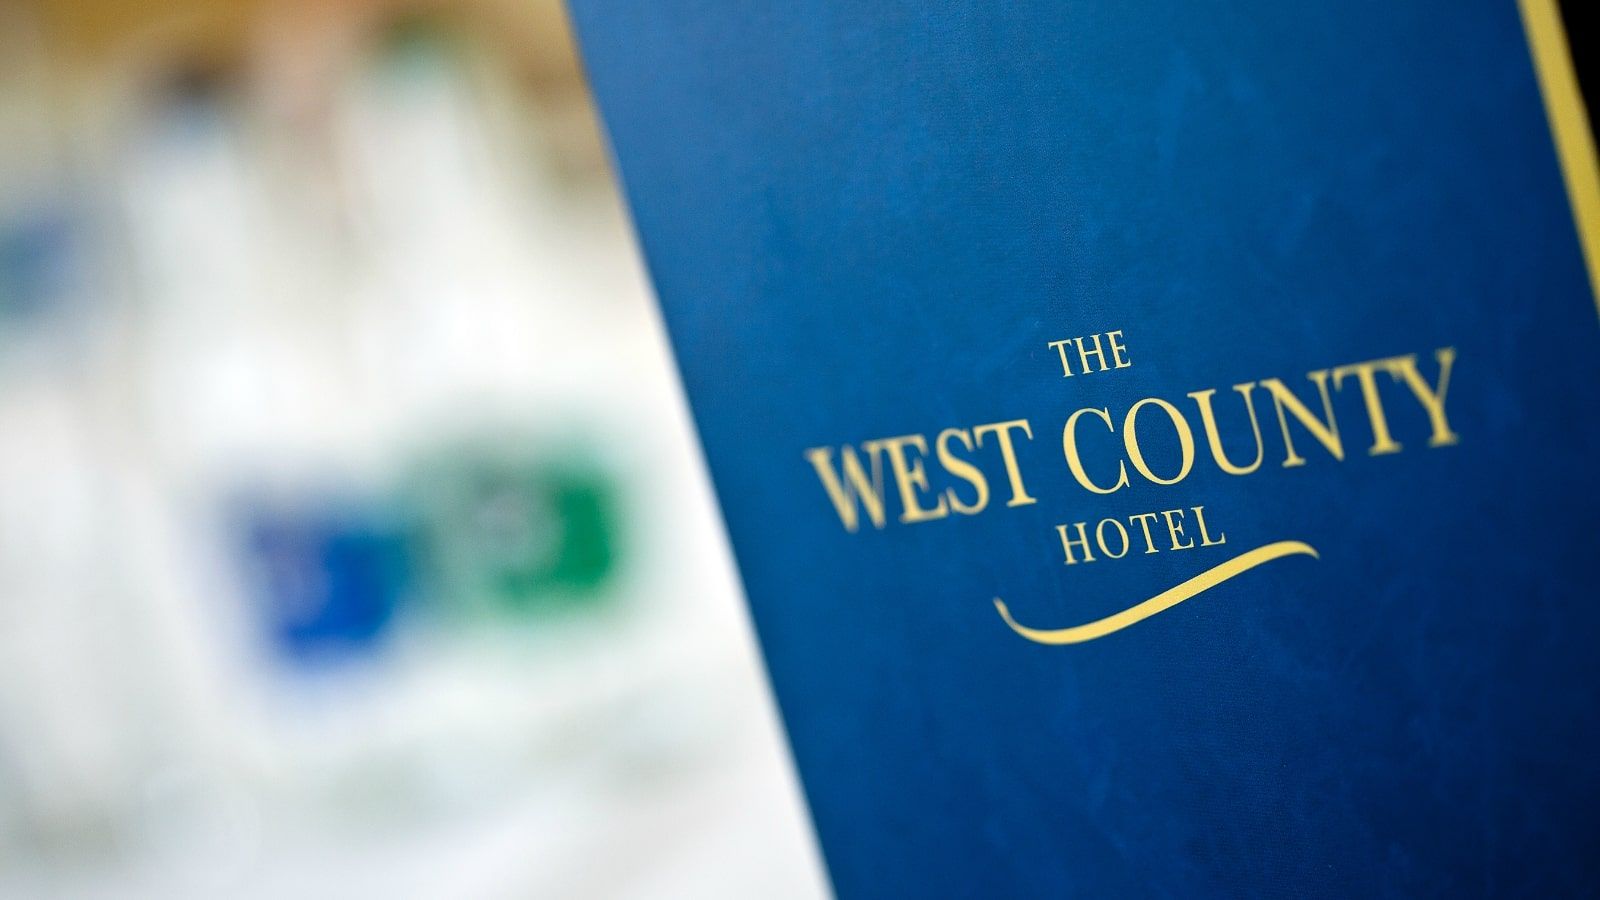 West County Hotel Dublin Conferences 2